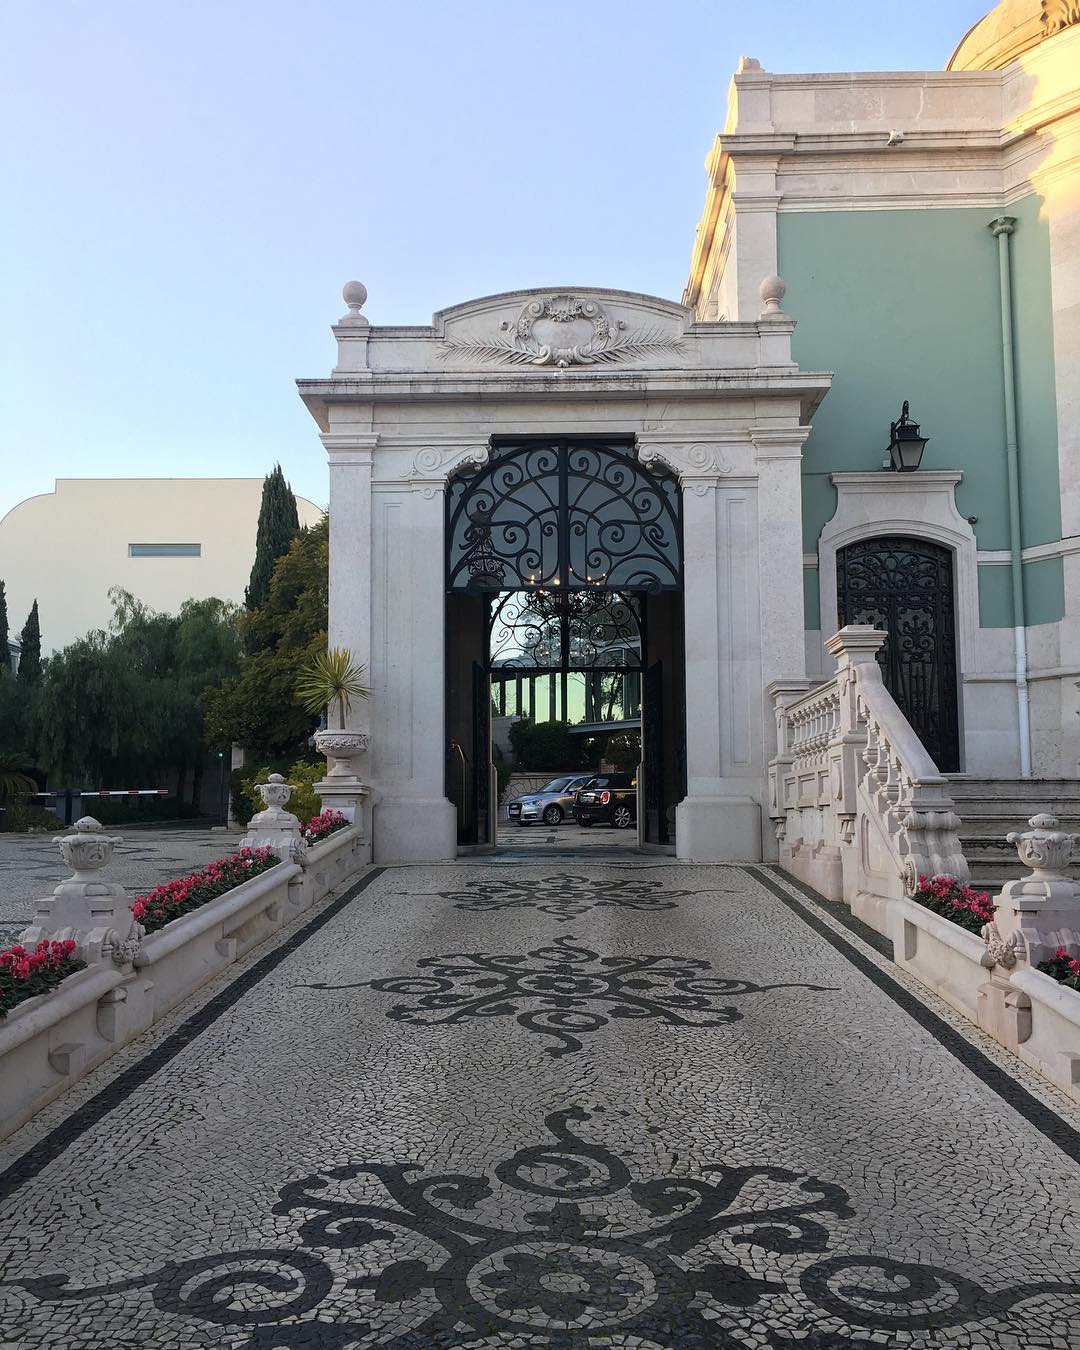 Sunset over the entrance/driveway of the Pestana Palace i...